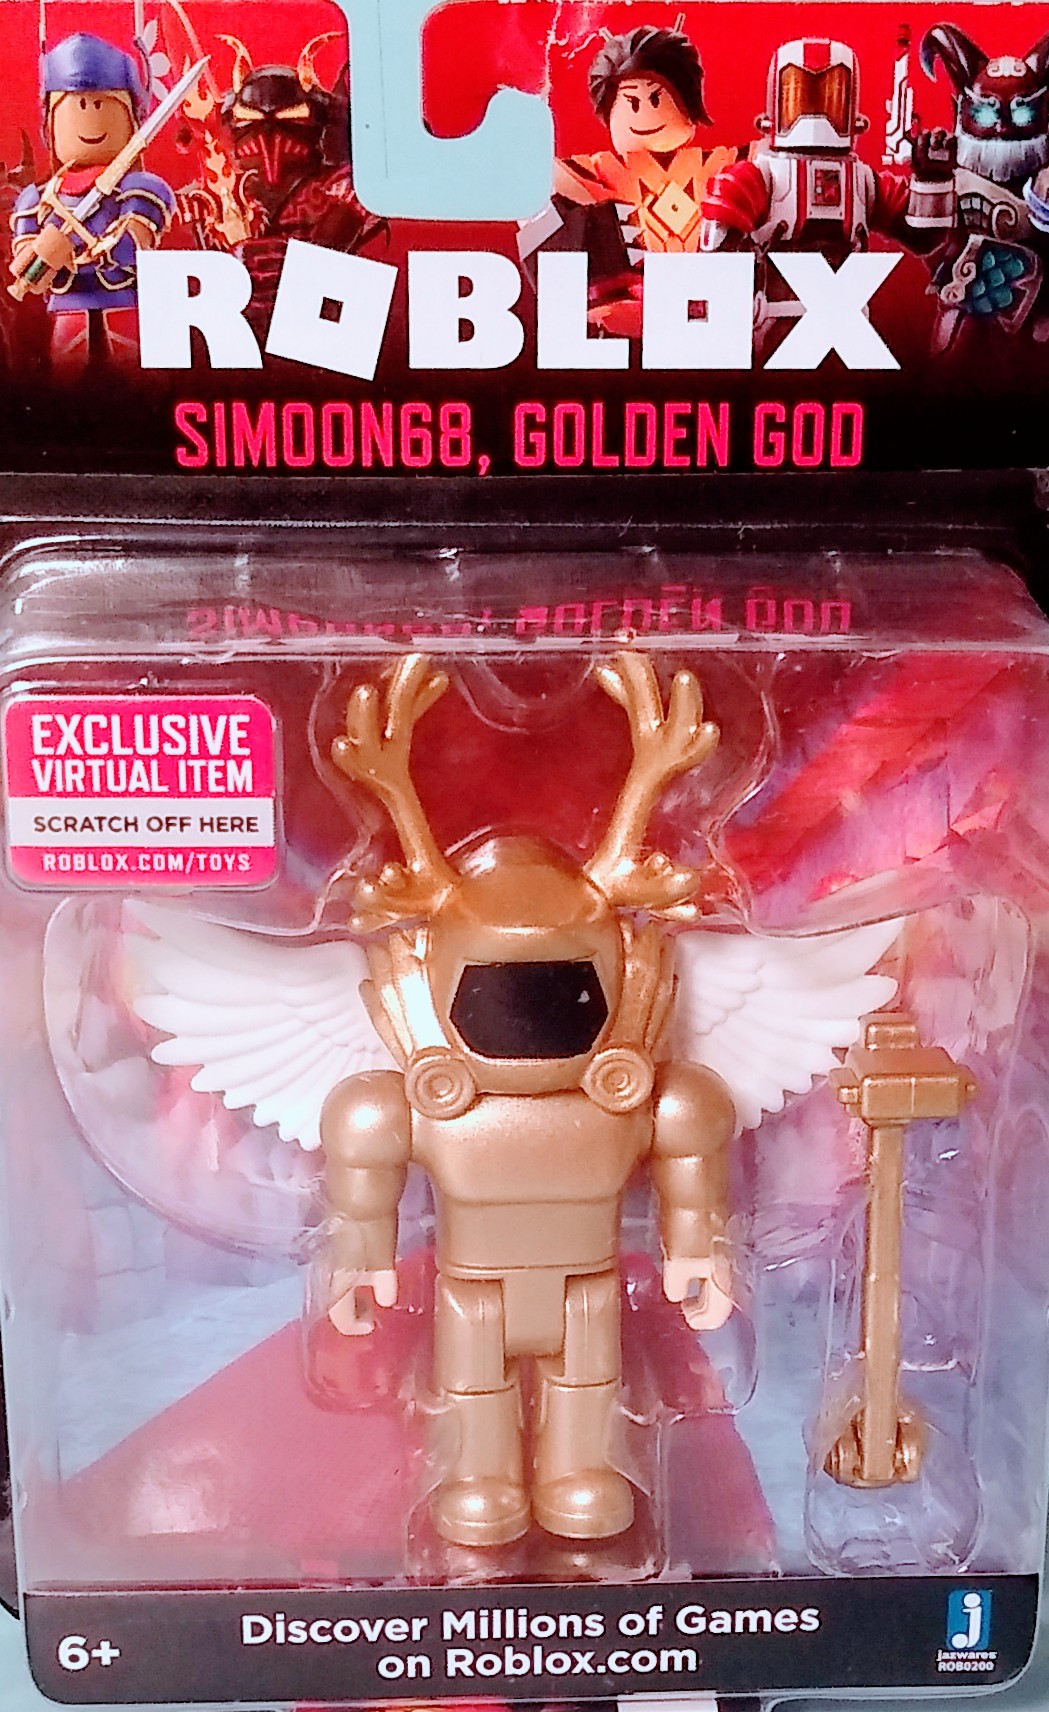  Roblox Simoon68: Golden God 3.5 Inch Figure with